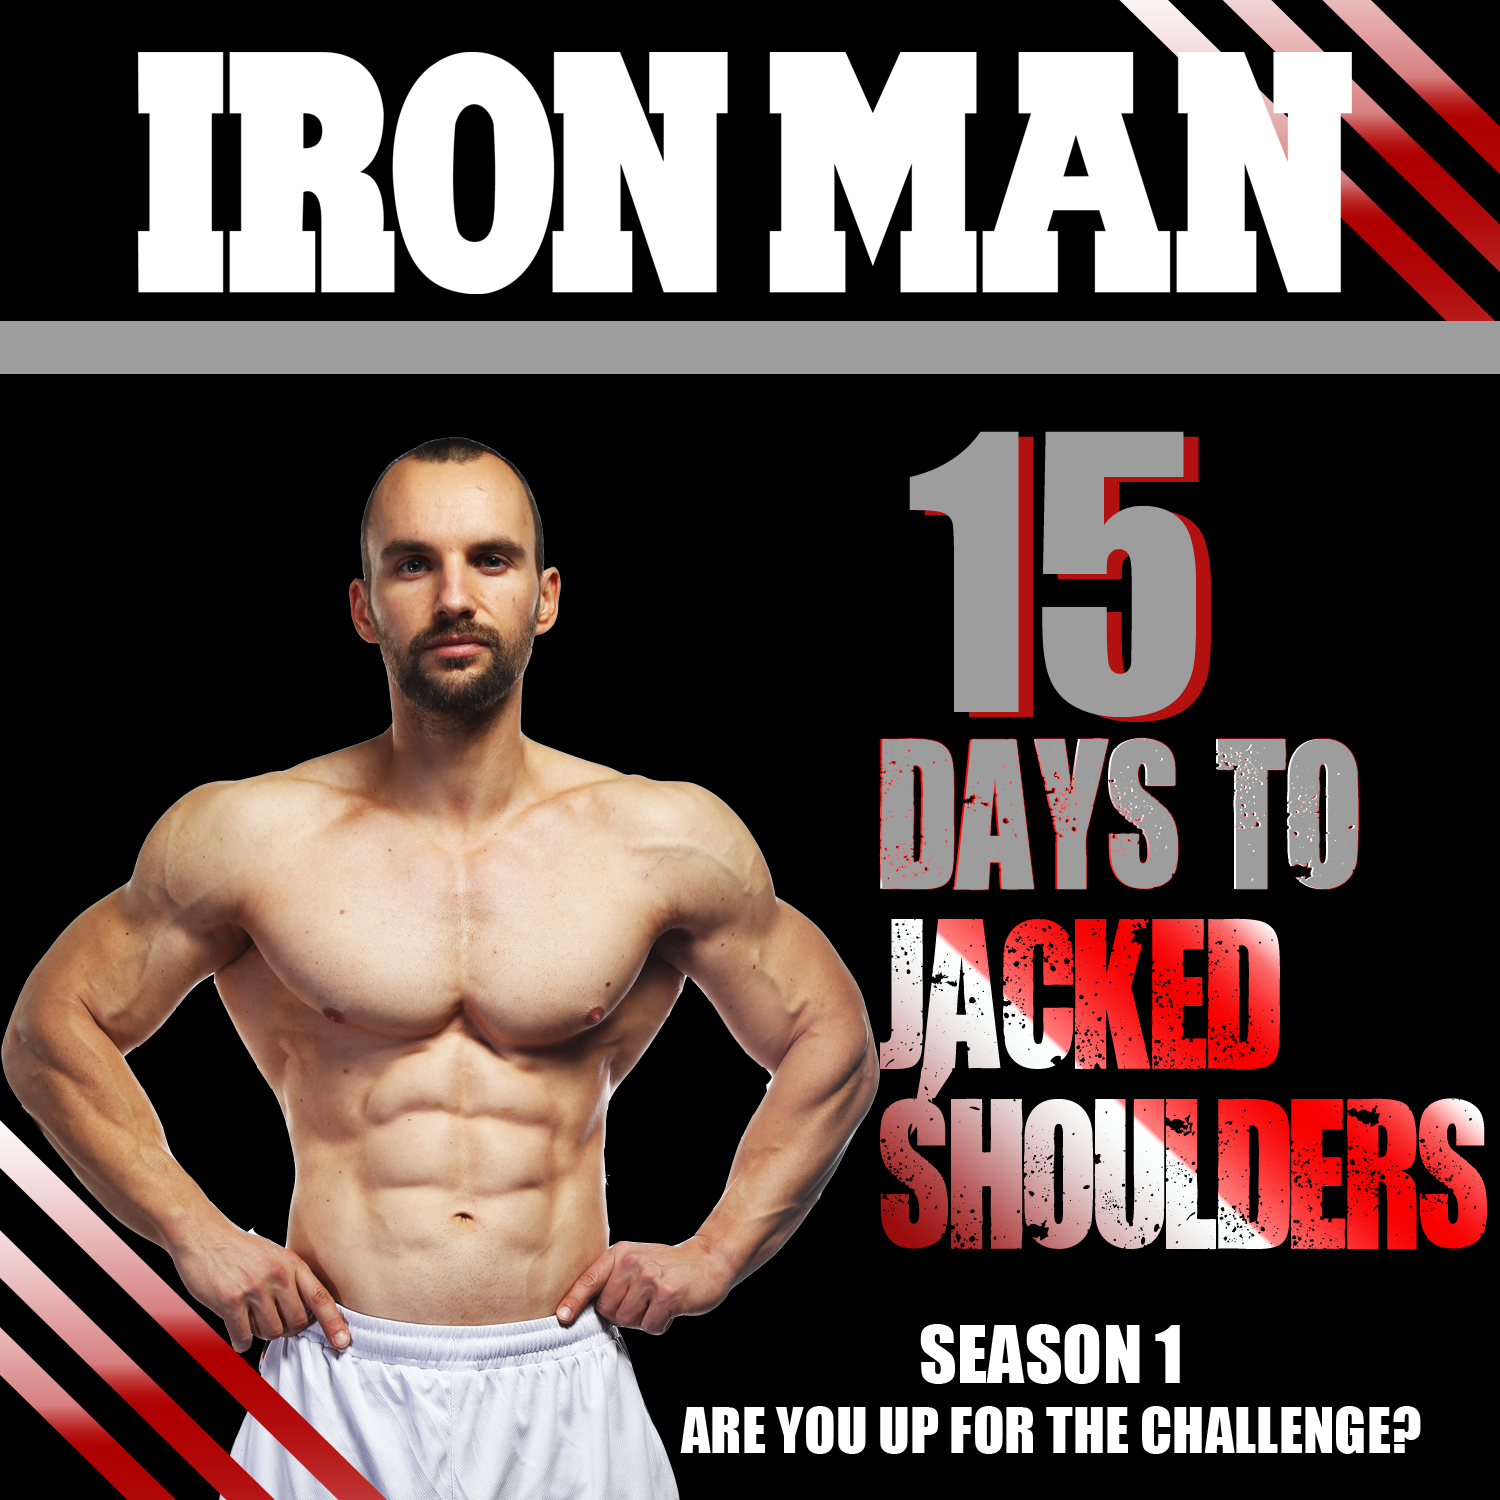 IRON MAN CHALLENGE 20 JACKED SHOULDERS IN 20 DAYS  